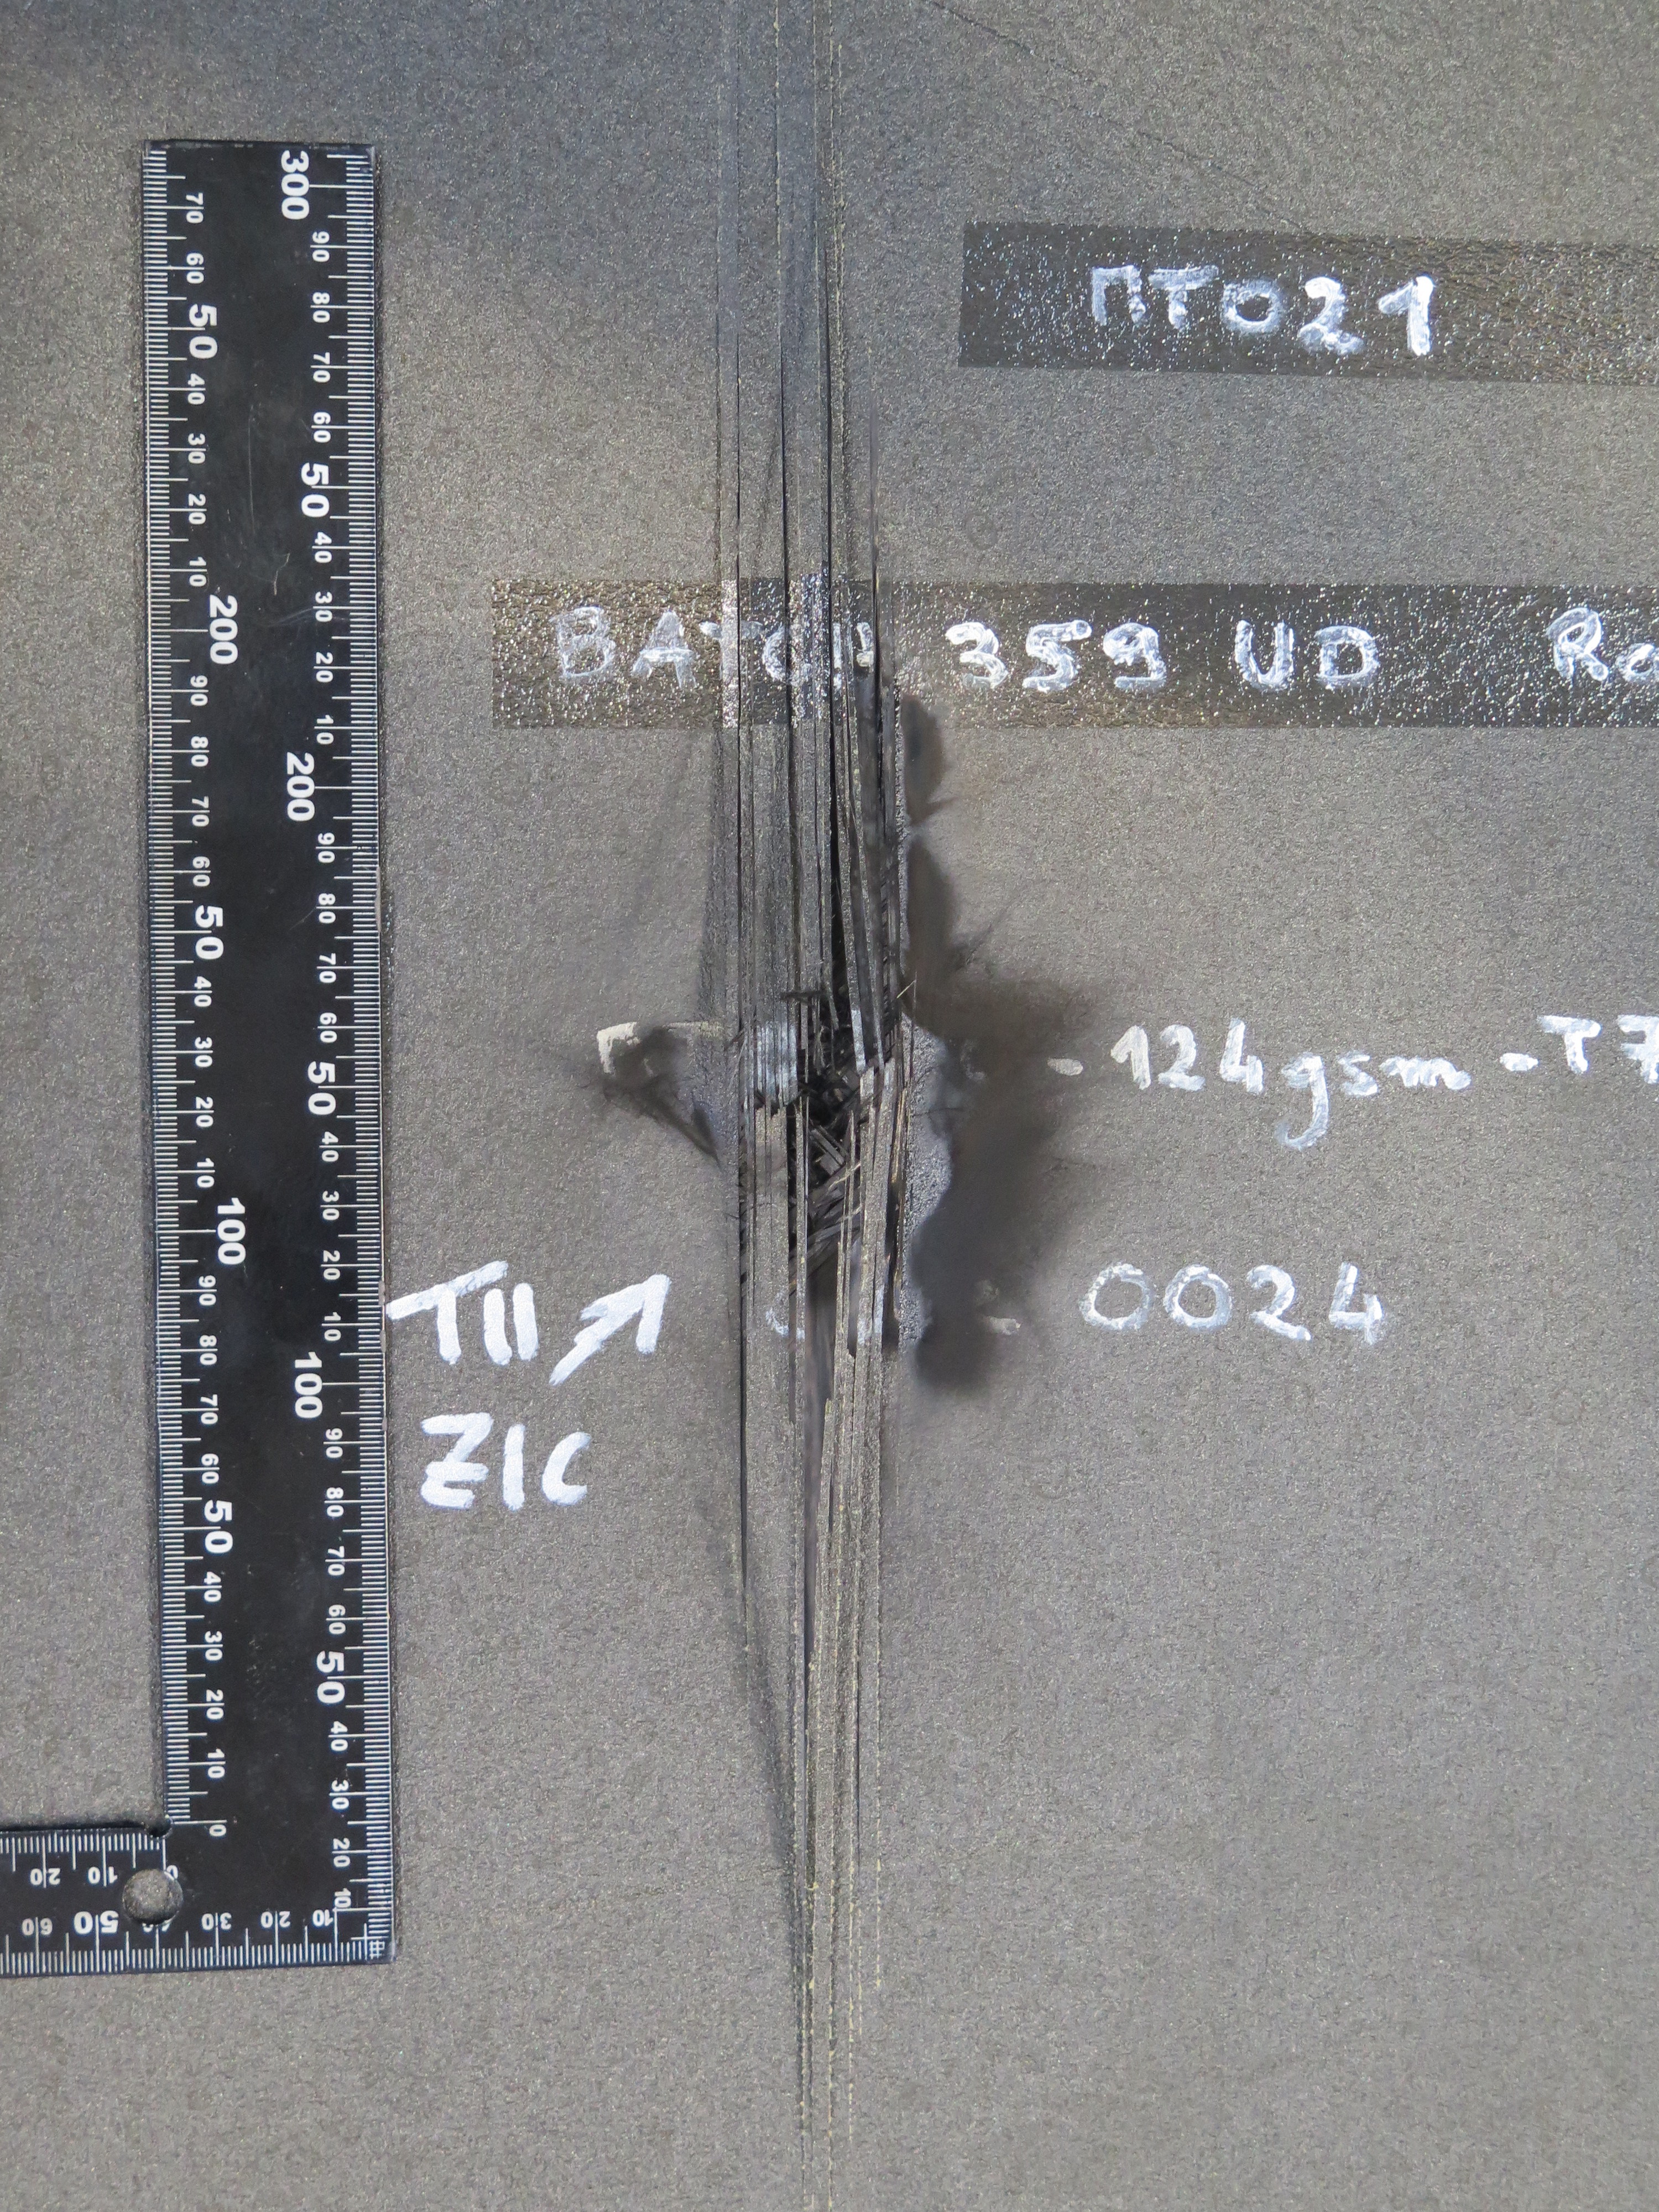 Figure 1. Back face of unmodified panel after lightning strike showing punch-through.